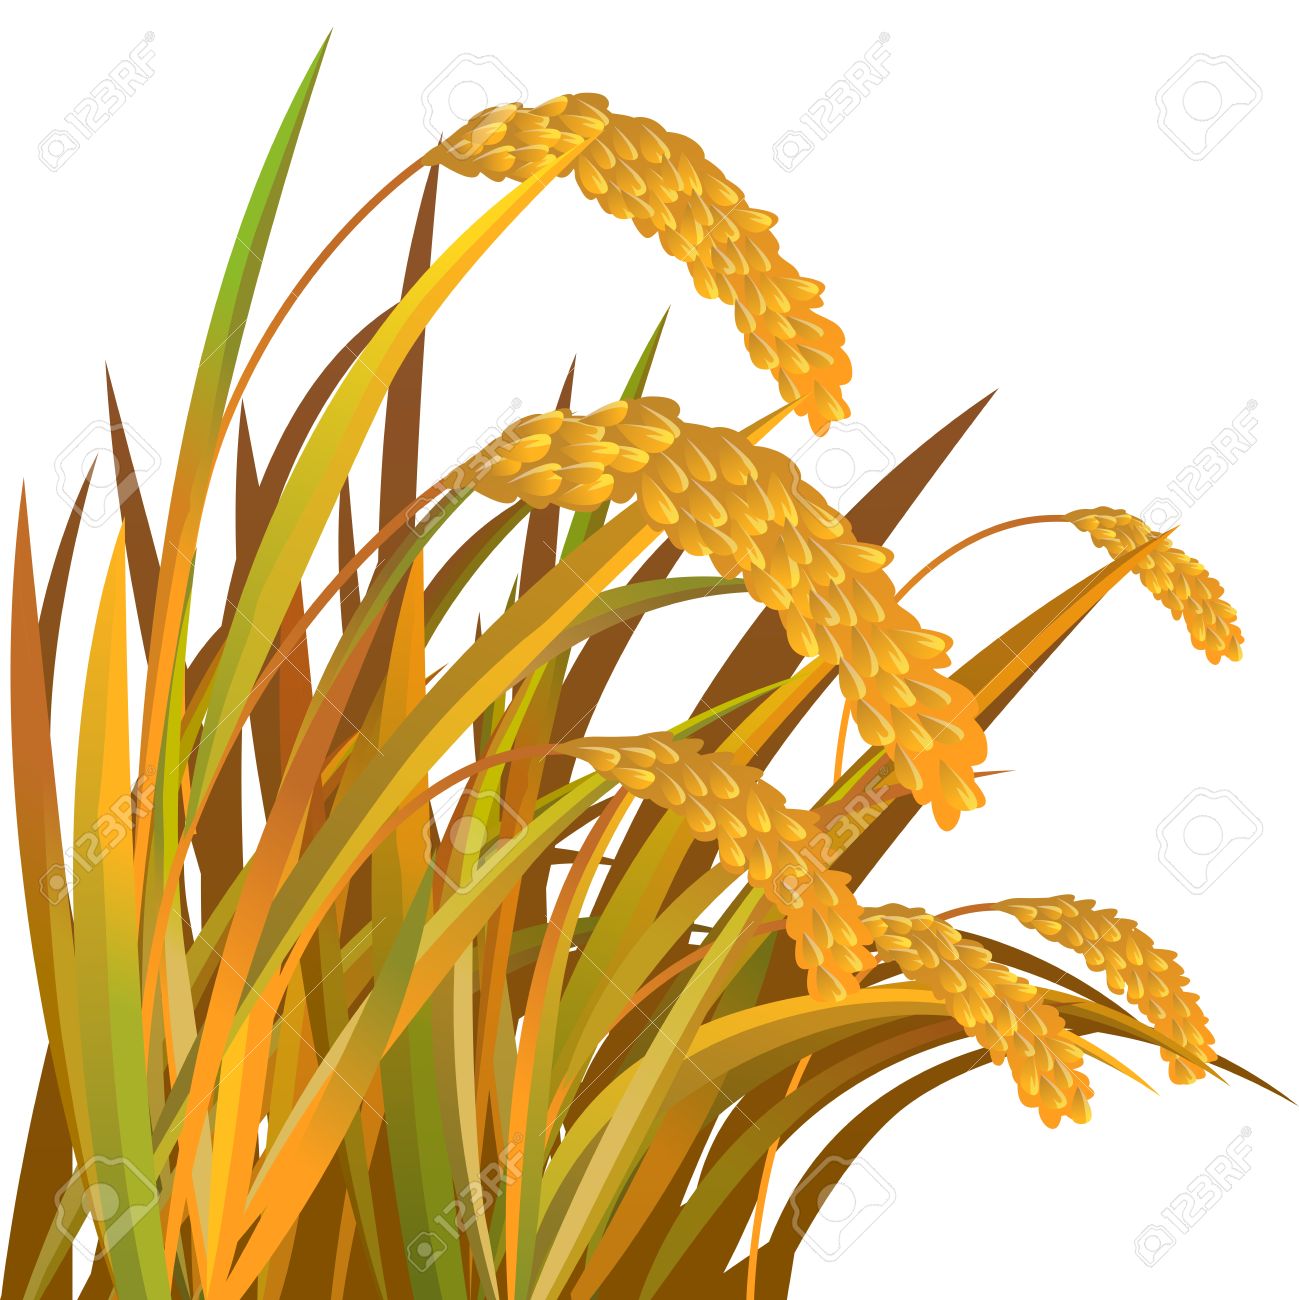 rice clipart rice straw clipart, transparent - 188.04Kb 1299x1300.